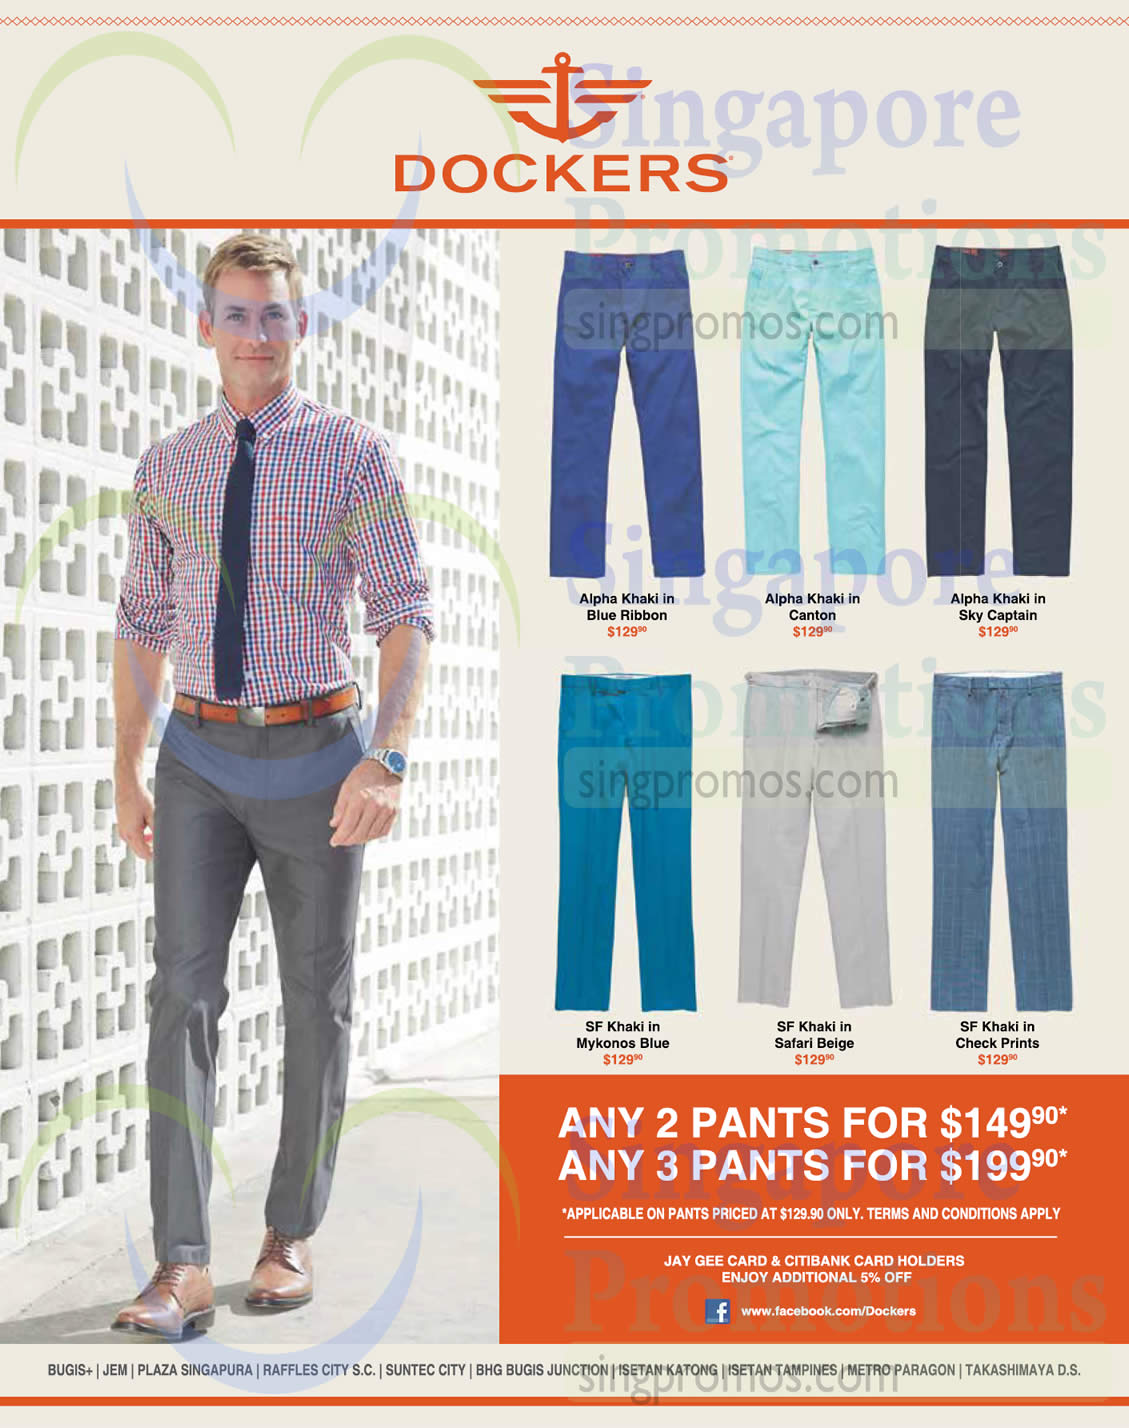 Featured image for Dockers Pants 2 for $149.90 & 3 for $199.90 Promotion 1 Apr - 31 May 2015